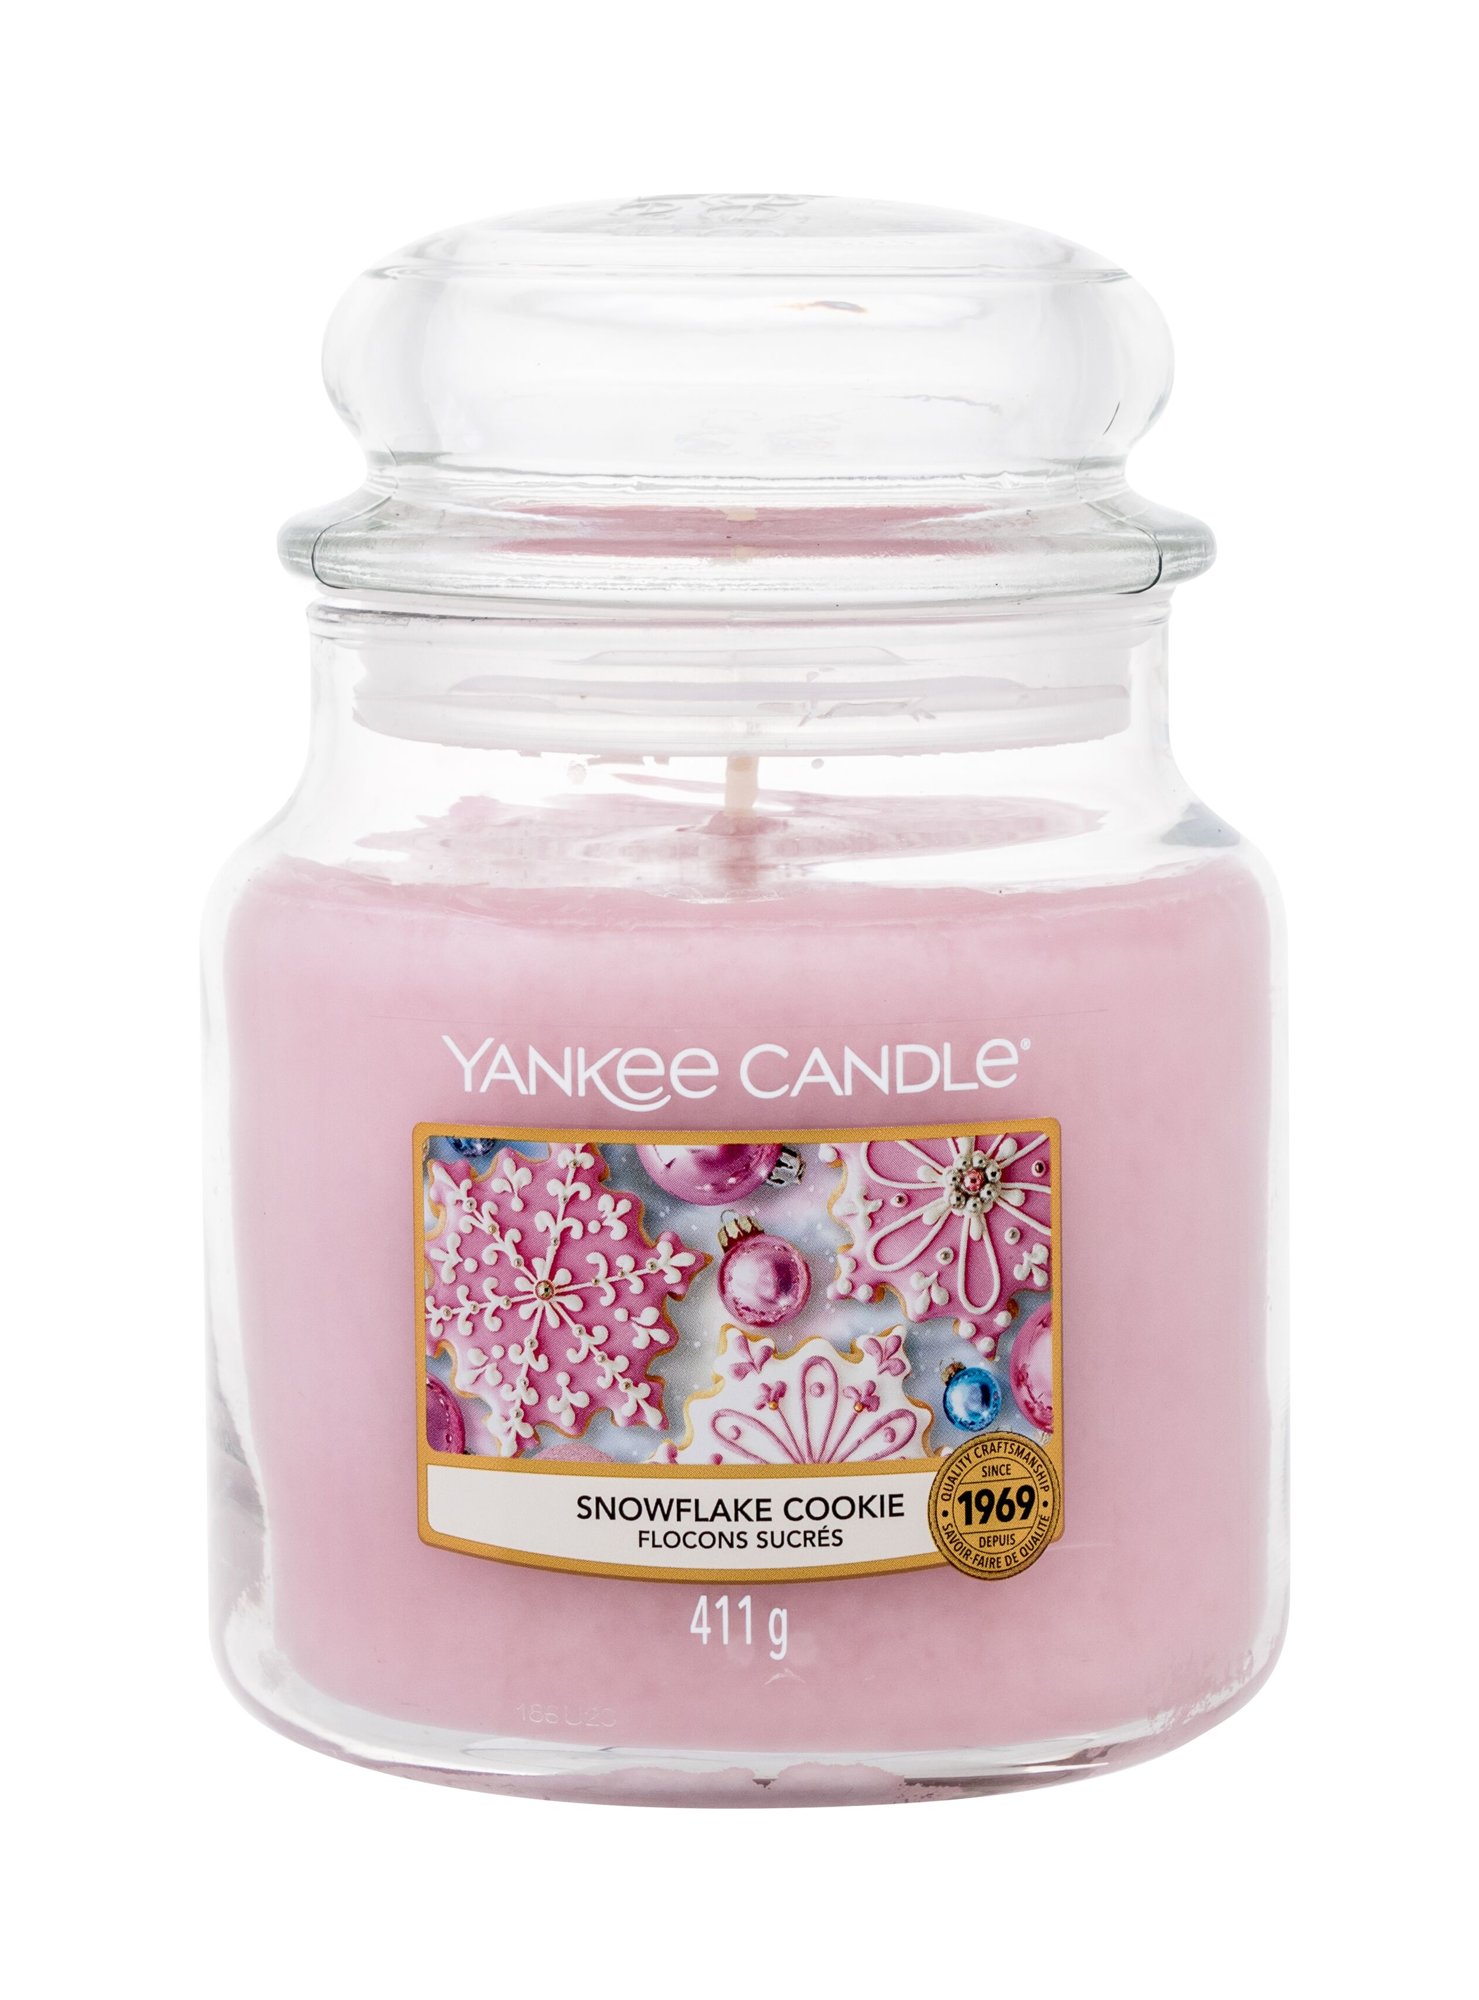 Yankee Candle Snowflake Cookie 411g Kvepalai Unisex Scented Candle